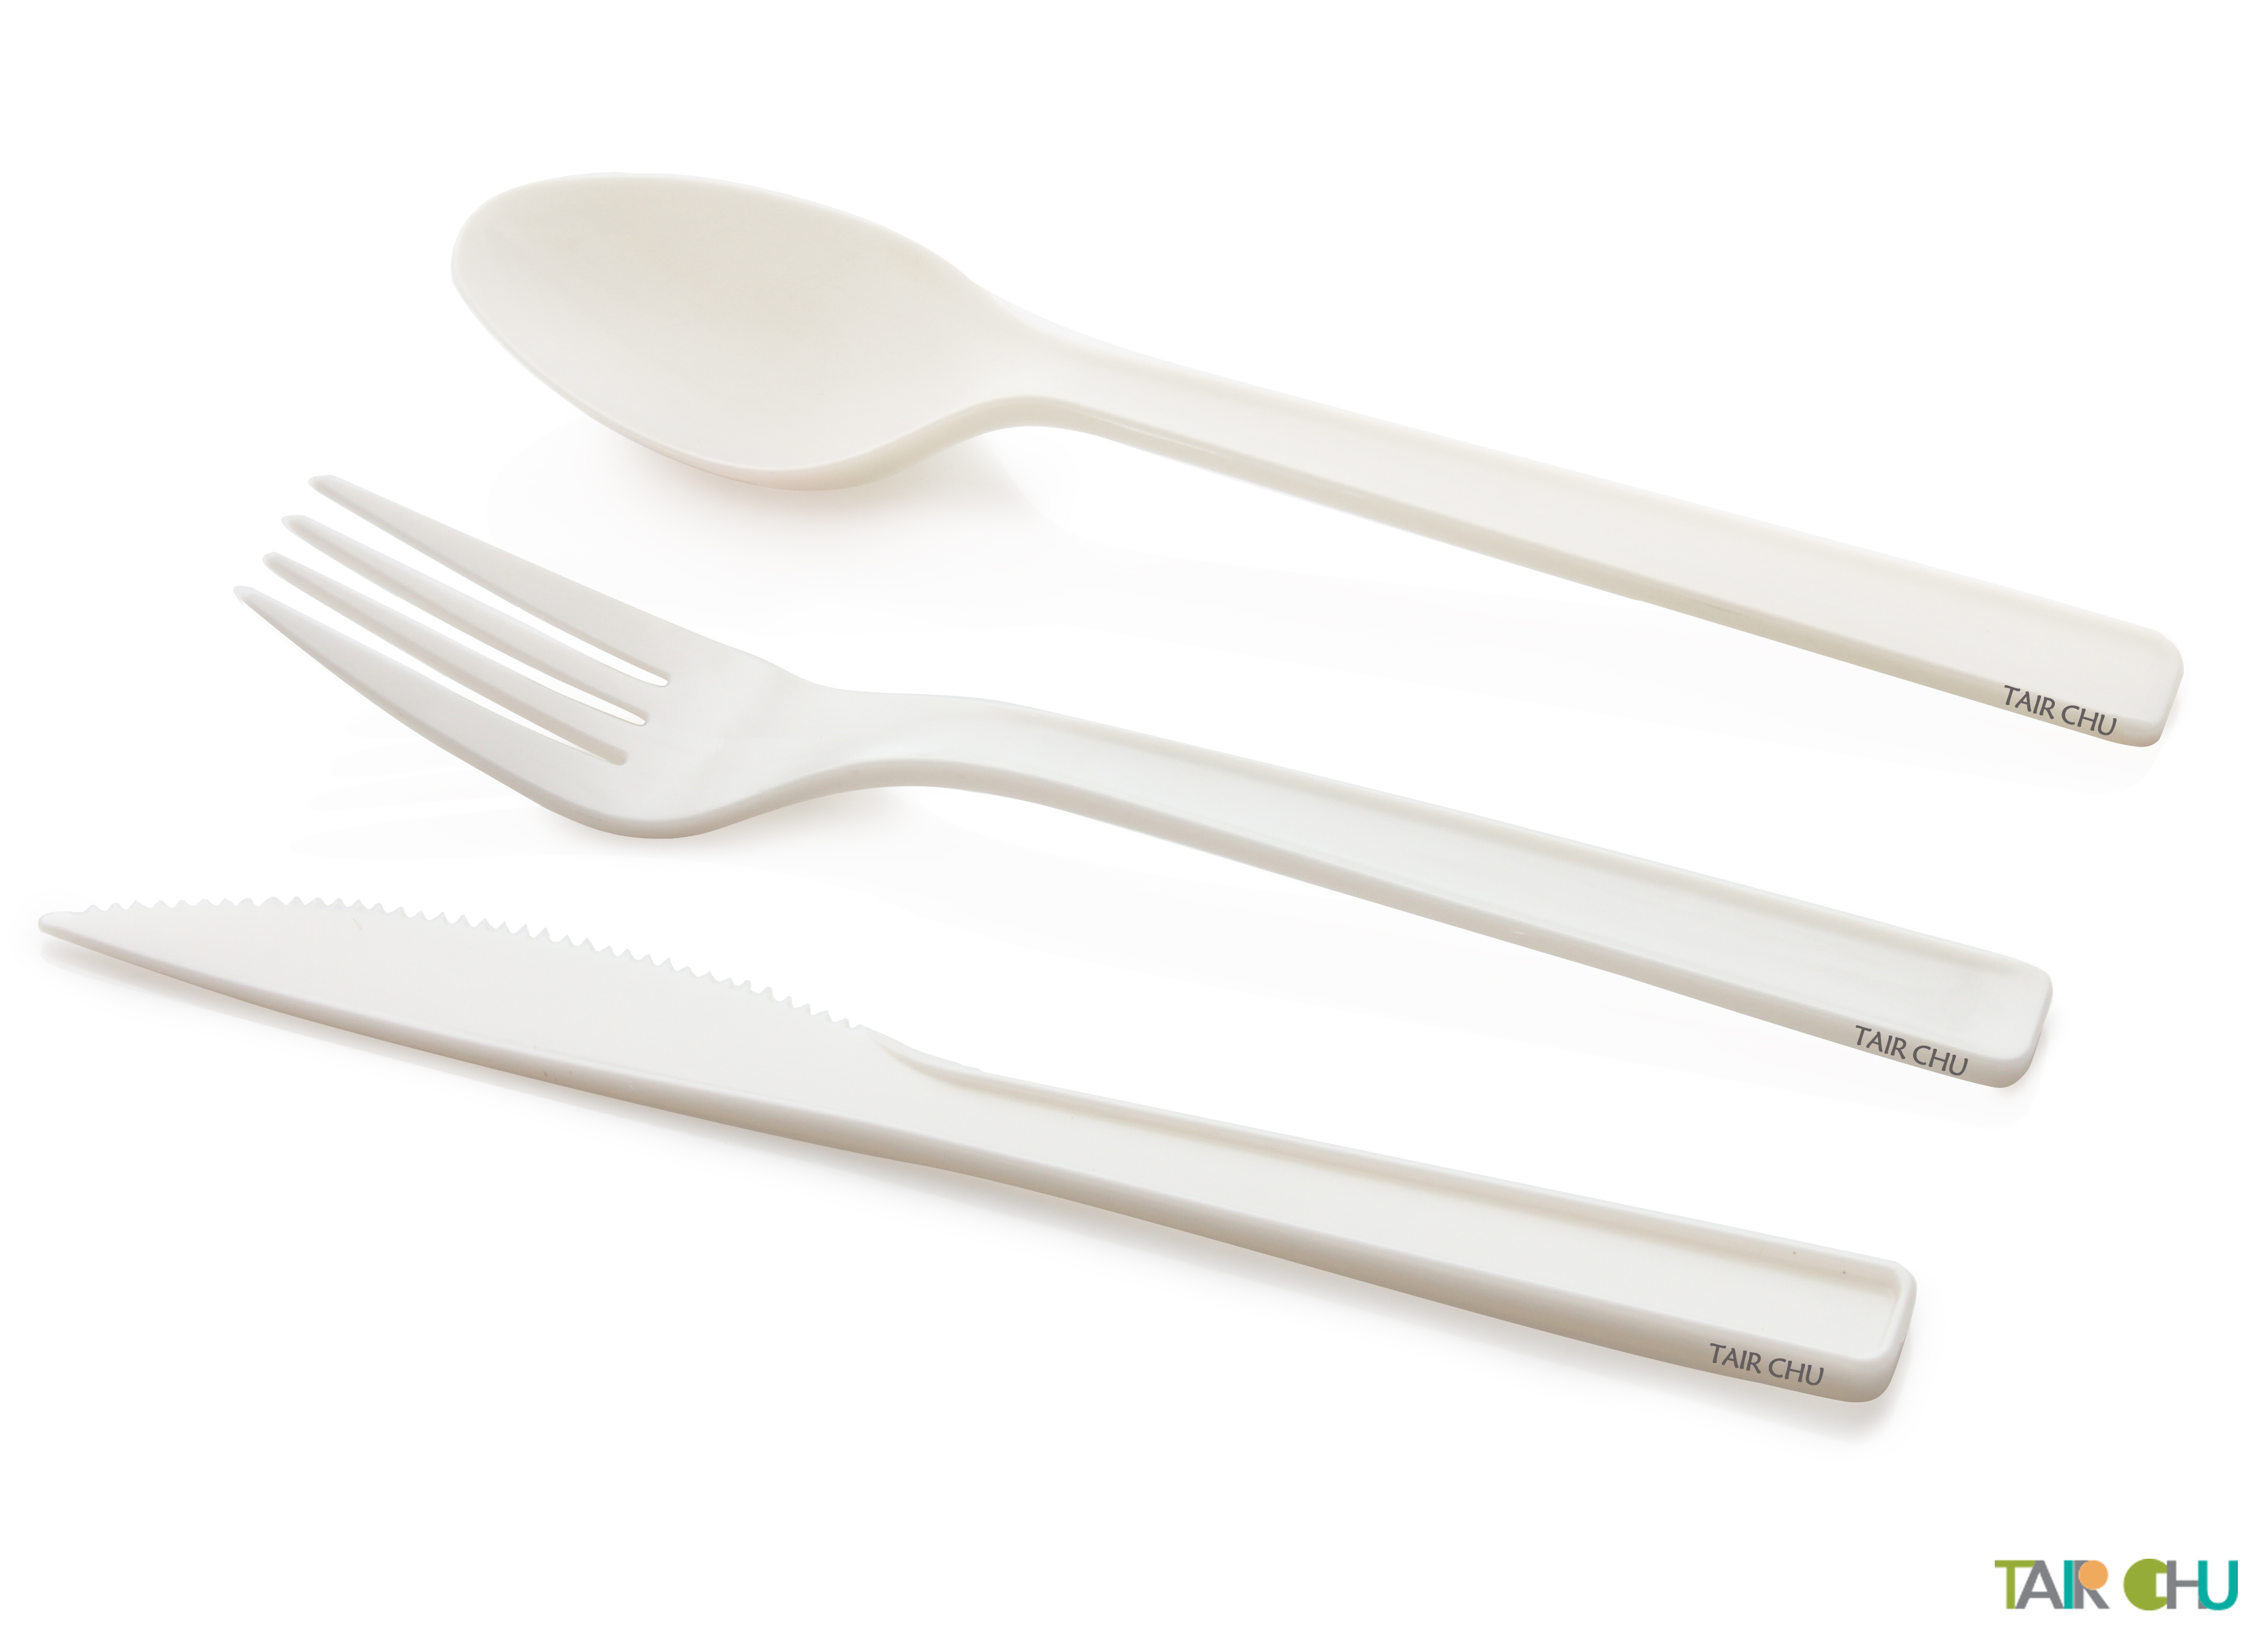 Compostable eco-friendly cutlery